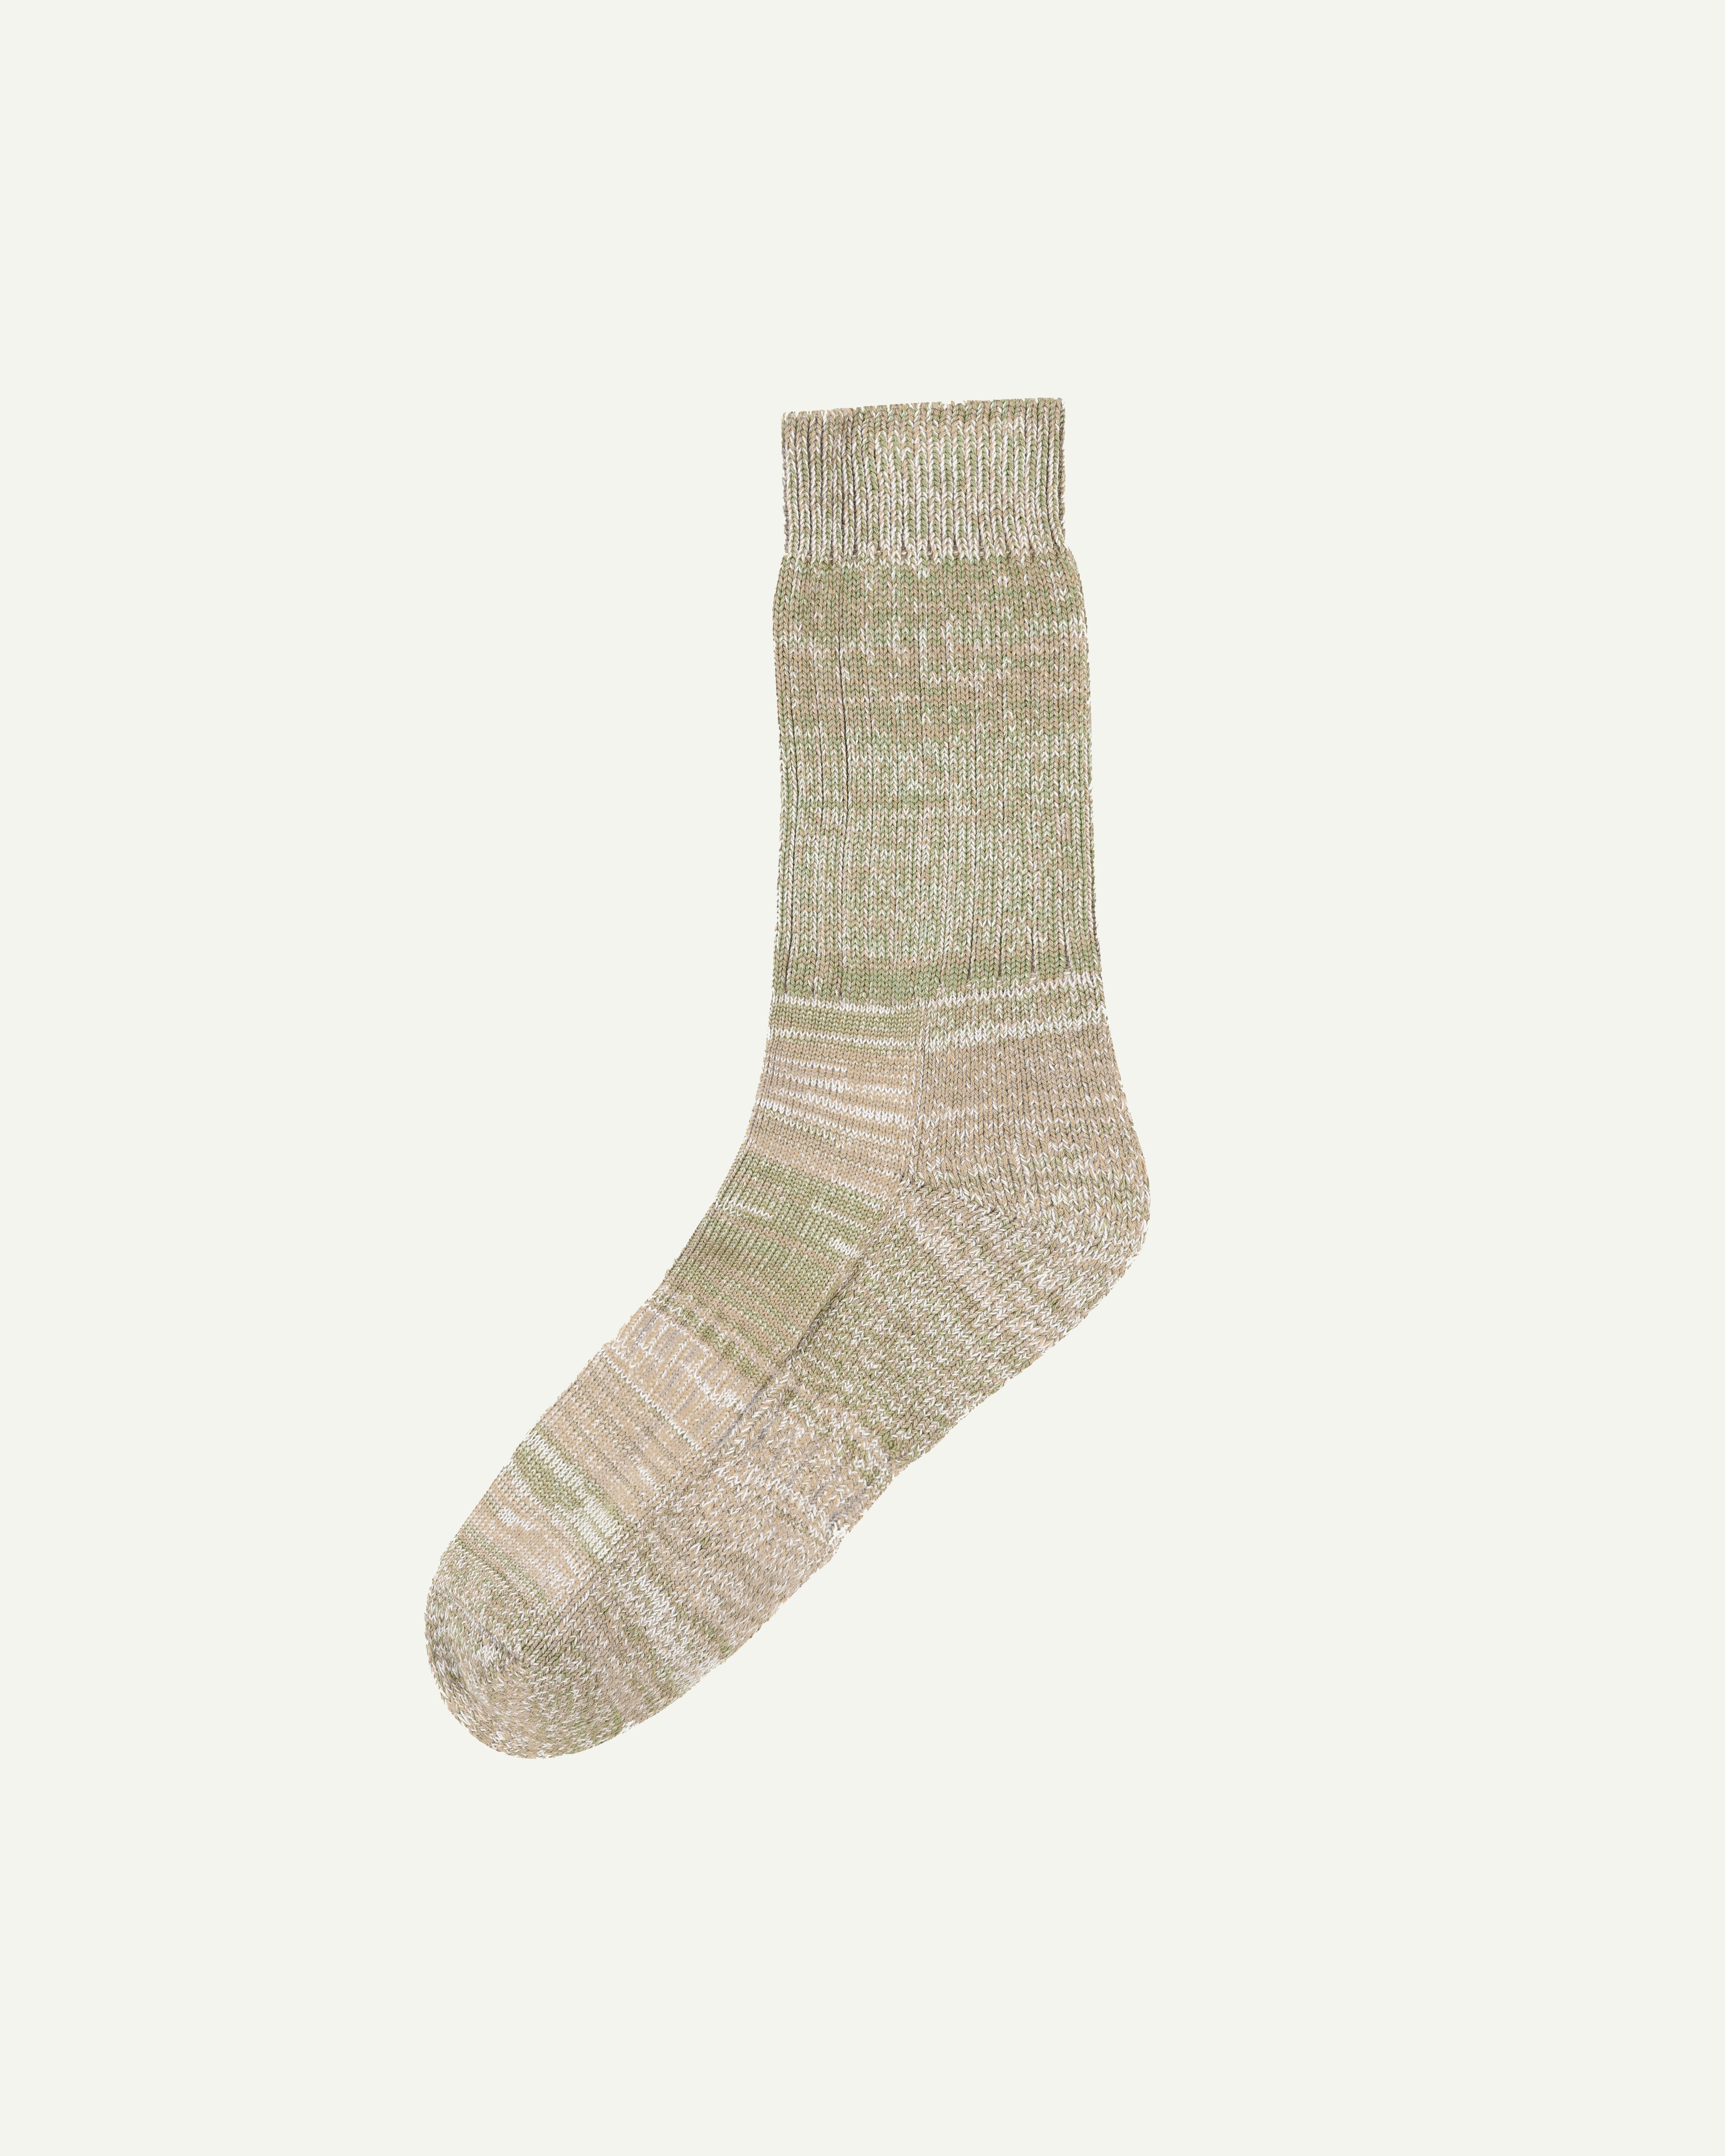 Flat view of Uskees #4006 organic cotton socks in khaki